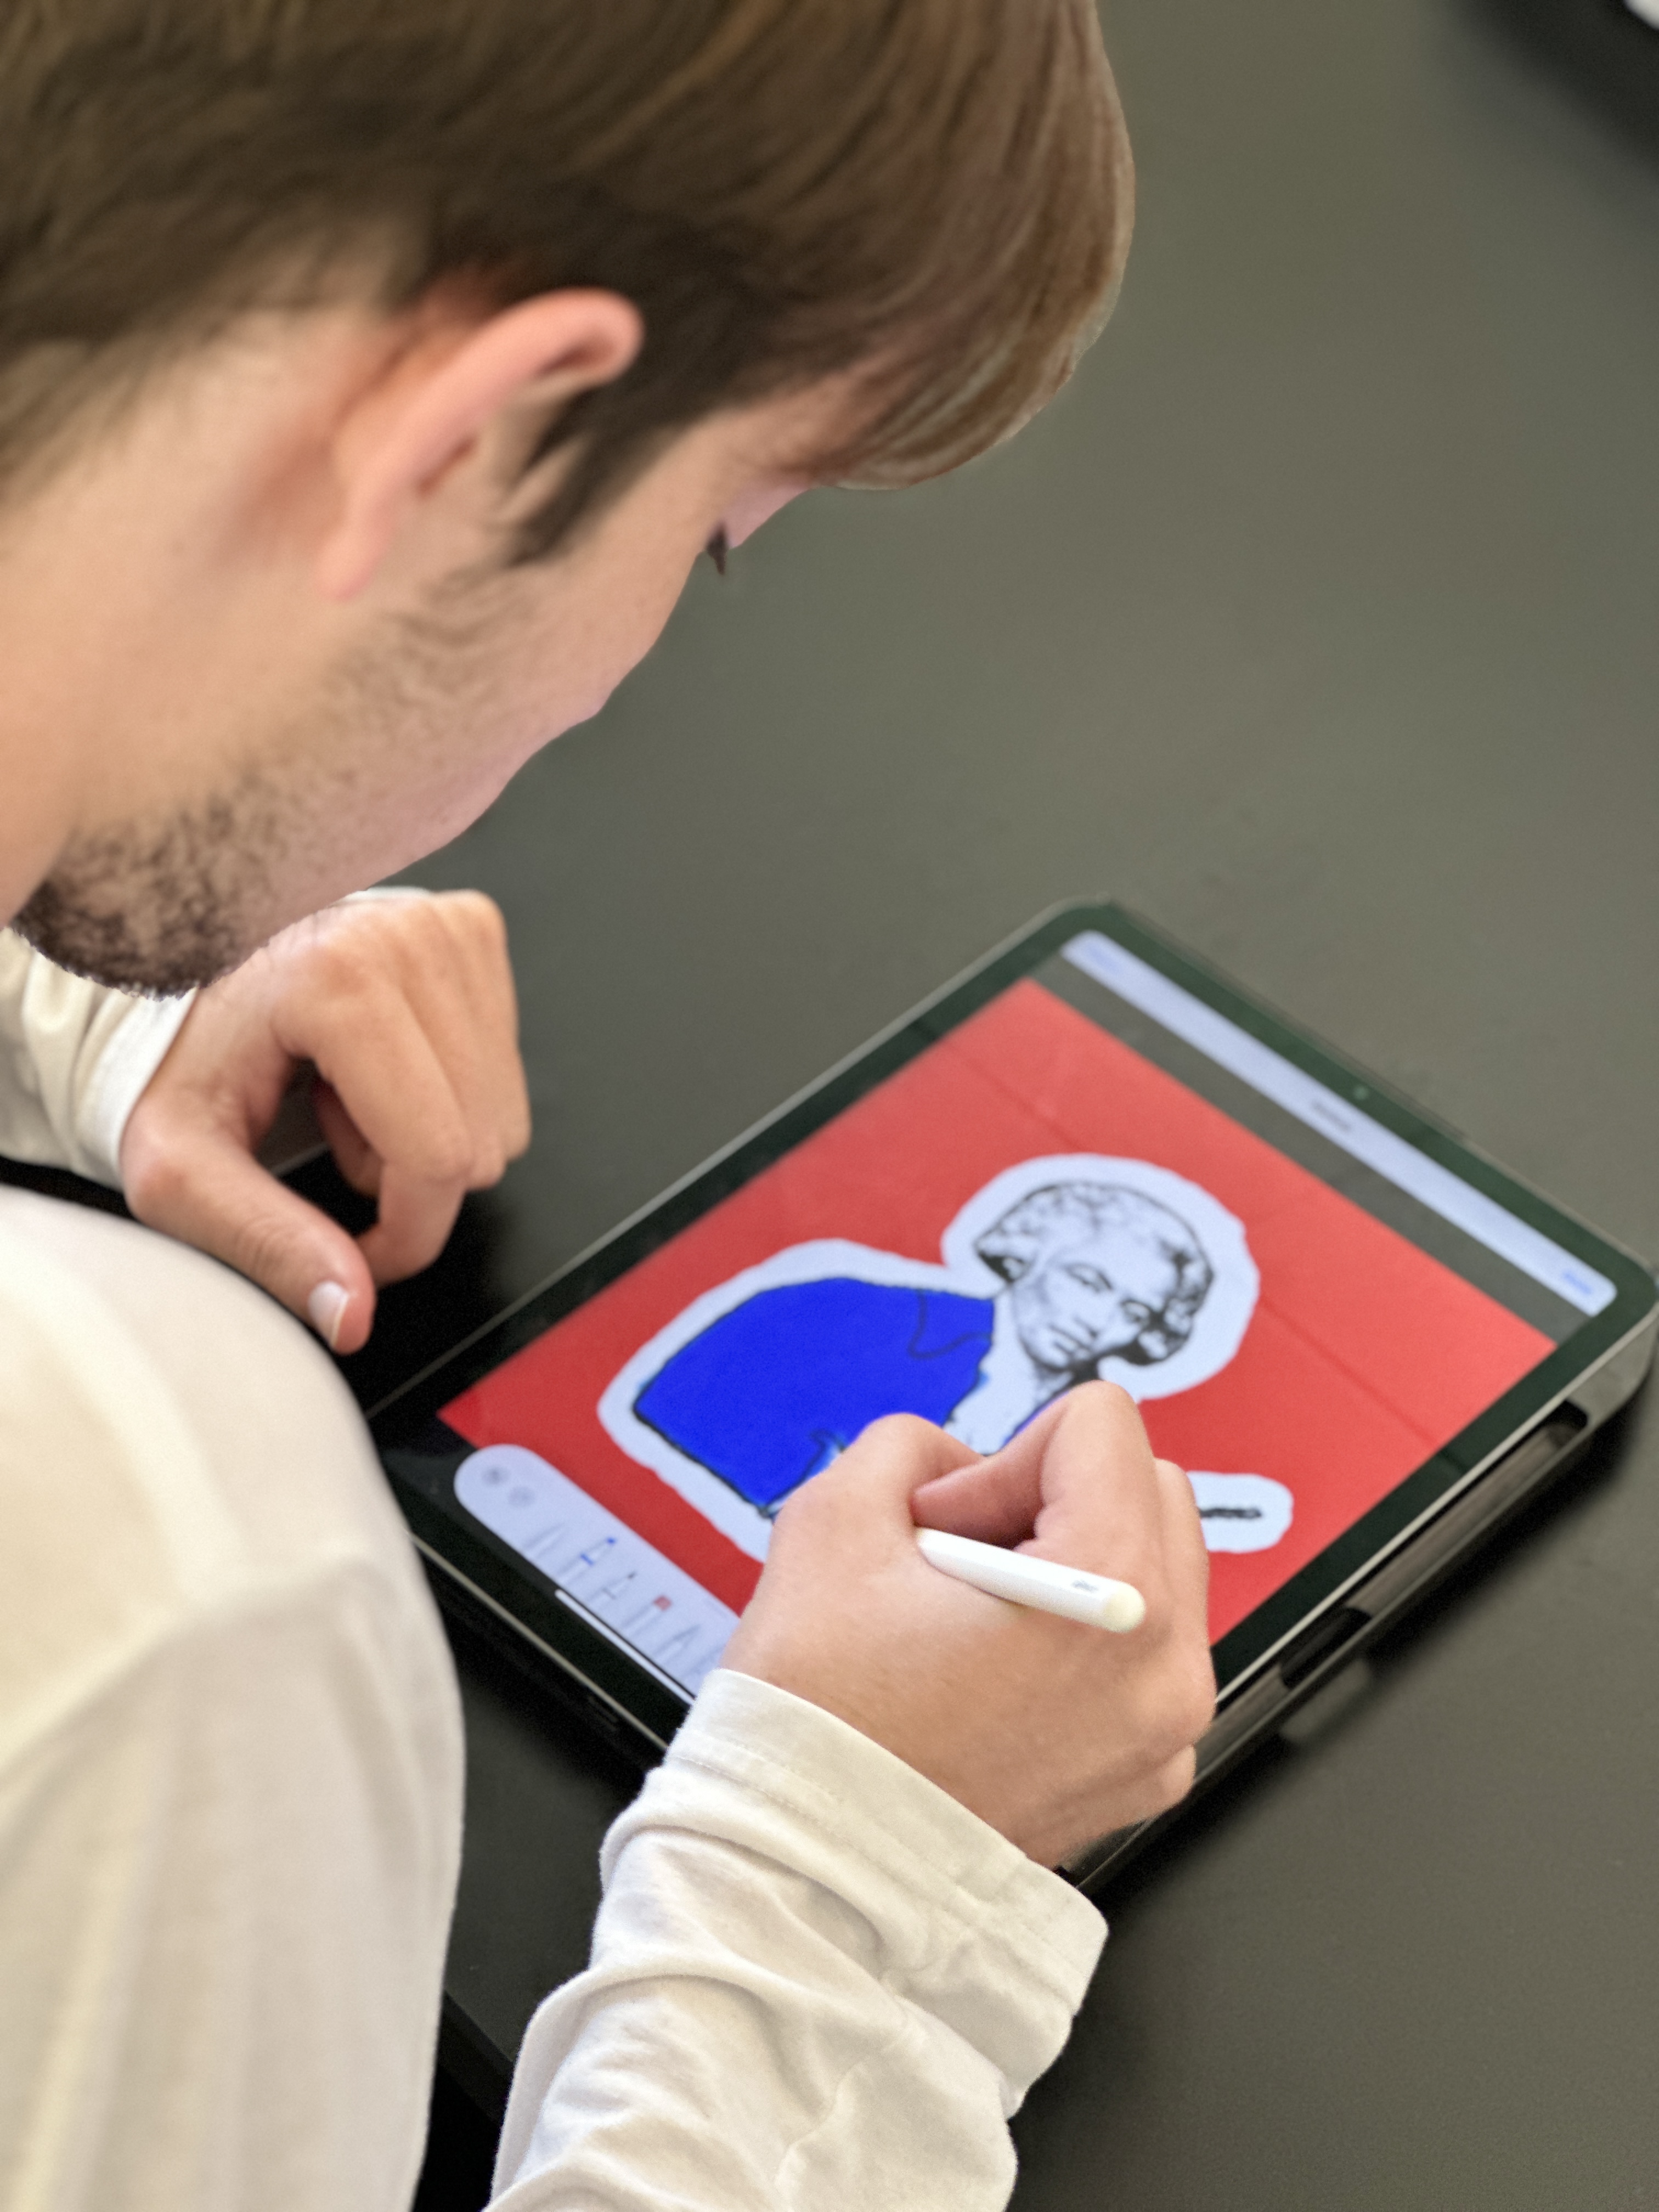 Student coloring an image of a composer on his iPad.